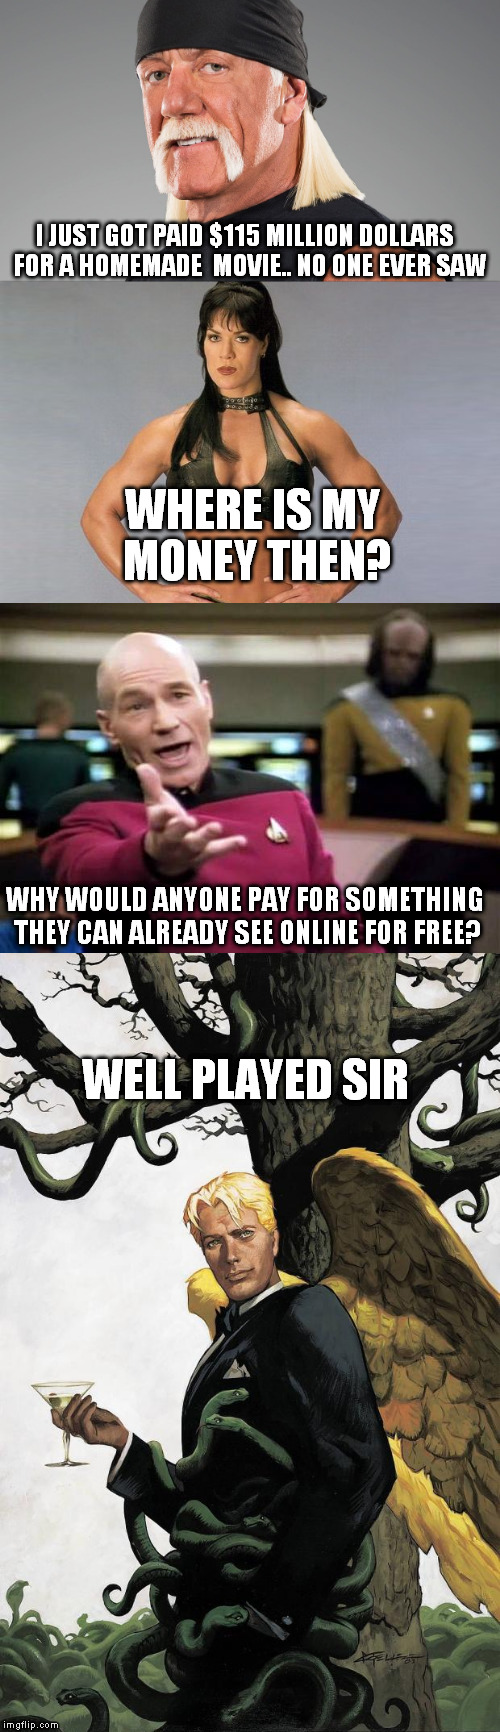 hogan gets paid | I JUST GOT PAID $115 MILLION DOLLARS  FOR A HOMEMADE  MOVIE.. NO ONE EVER SAW; WHERE IS MY MONEY THEN? WHY WOULD ANYONE PAY FOR SOMETHING THEY CAN ALREADY SEE ONLINE FOR FREE? WELL PLAYED SIR | image tagged in hulk hogan,chyna,picard,get paid,lucifer | made w/ Imgflip meme maker